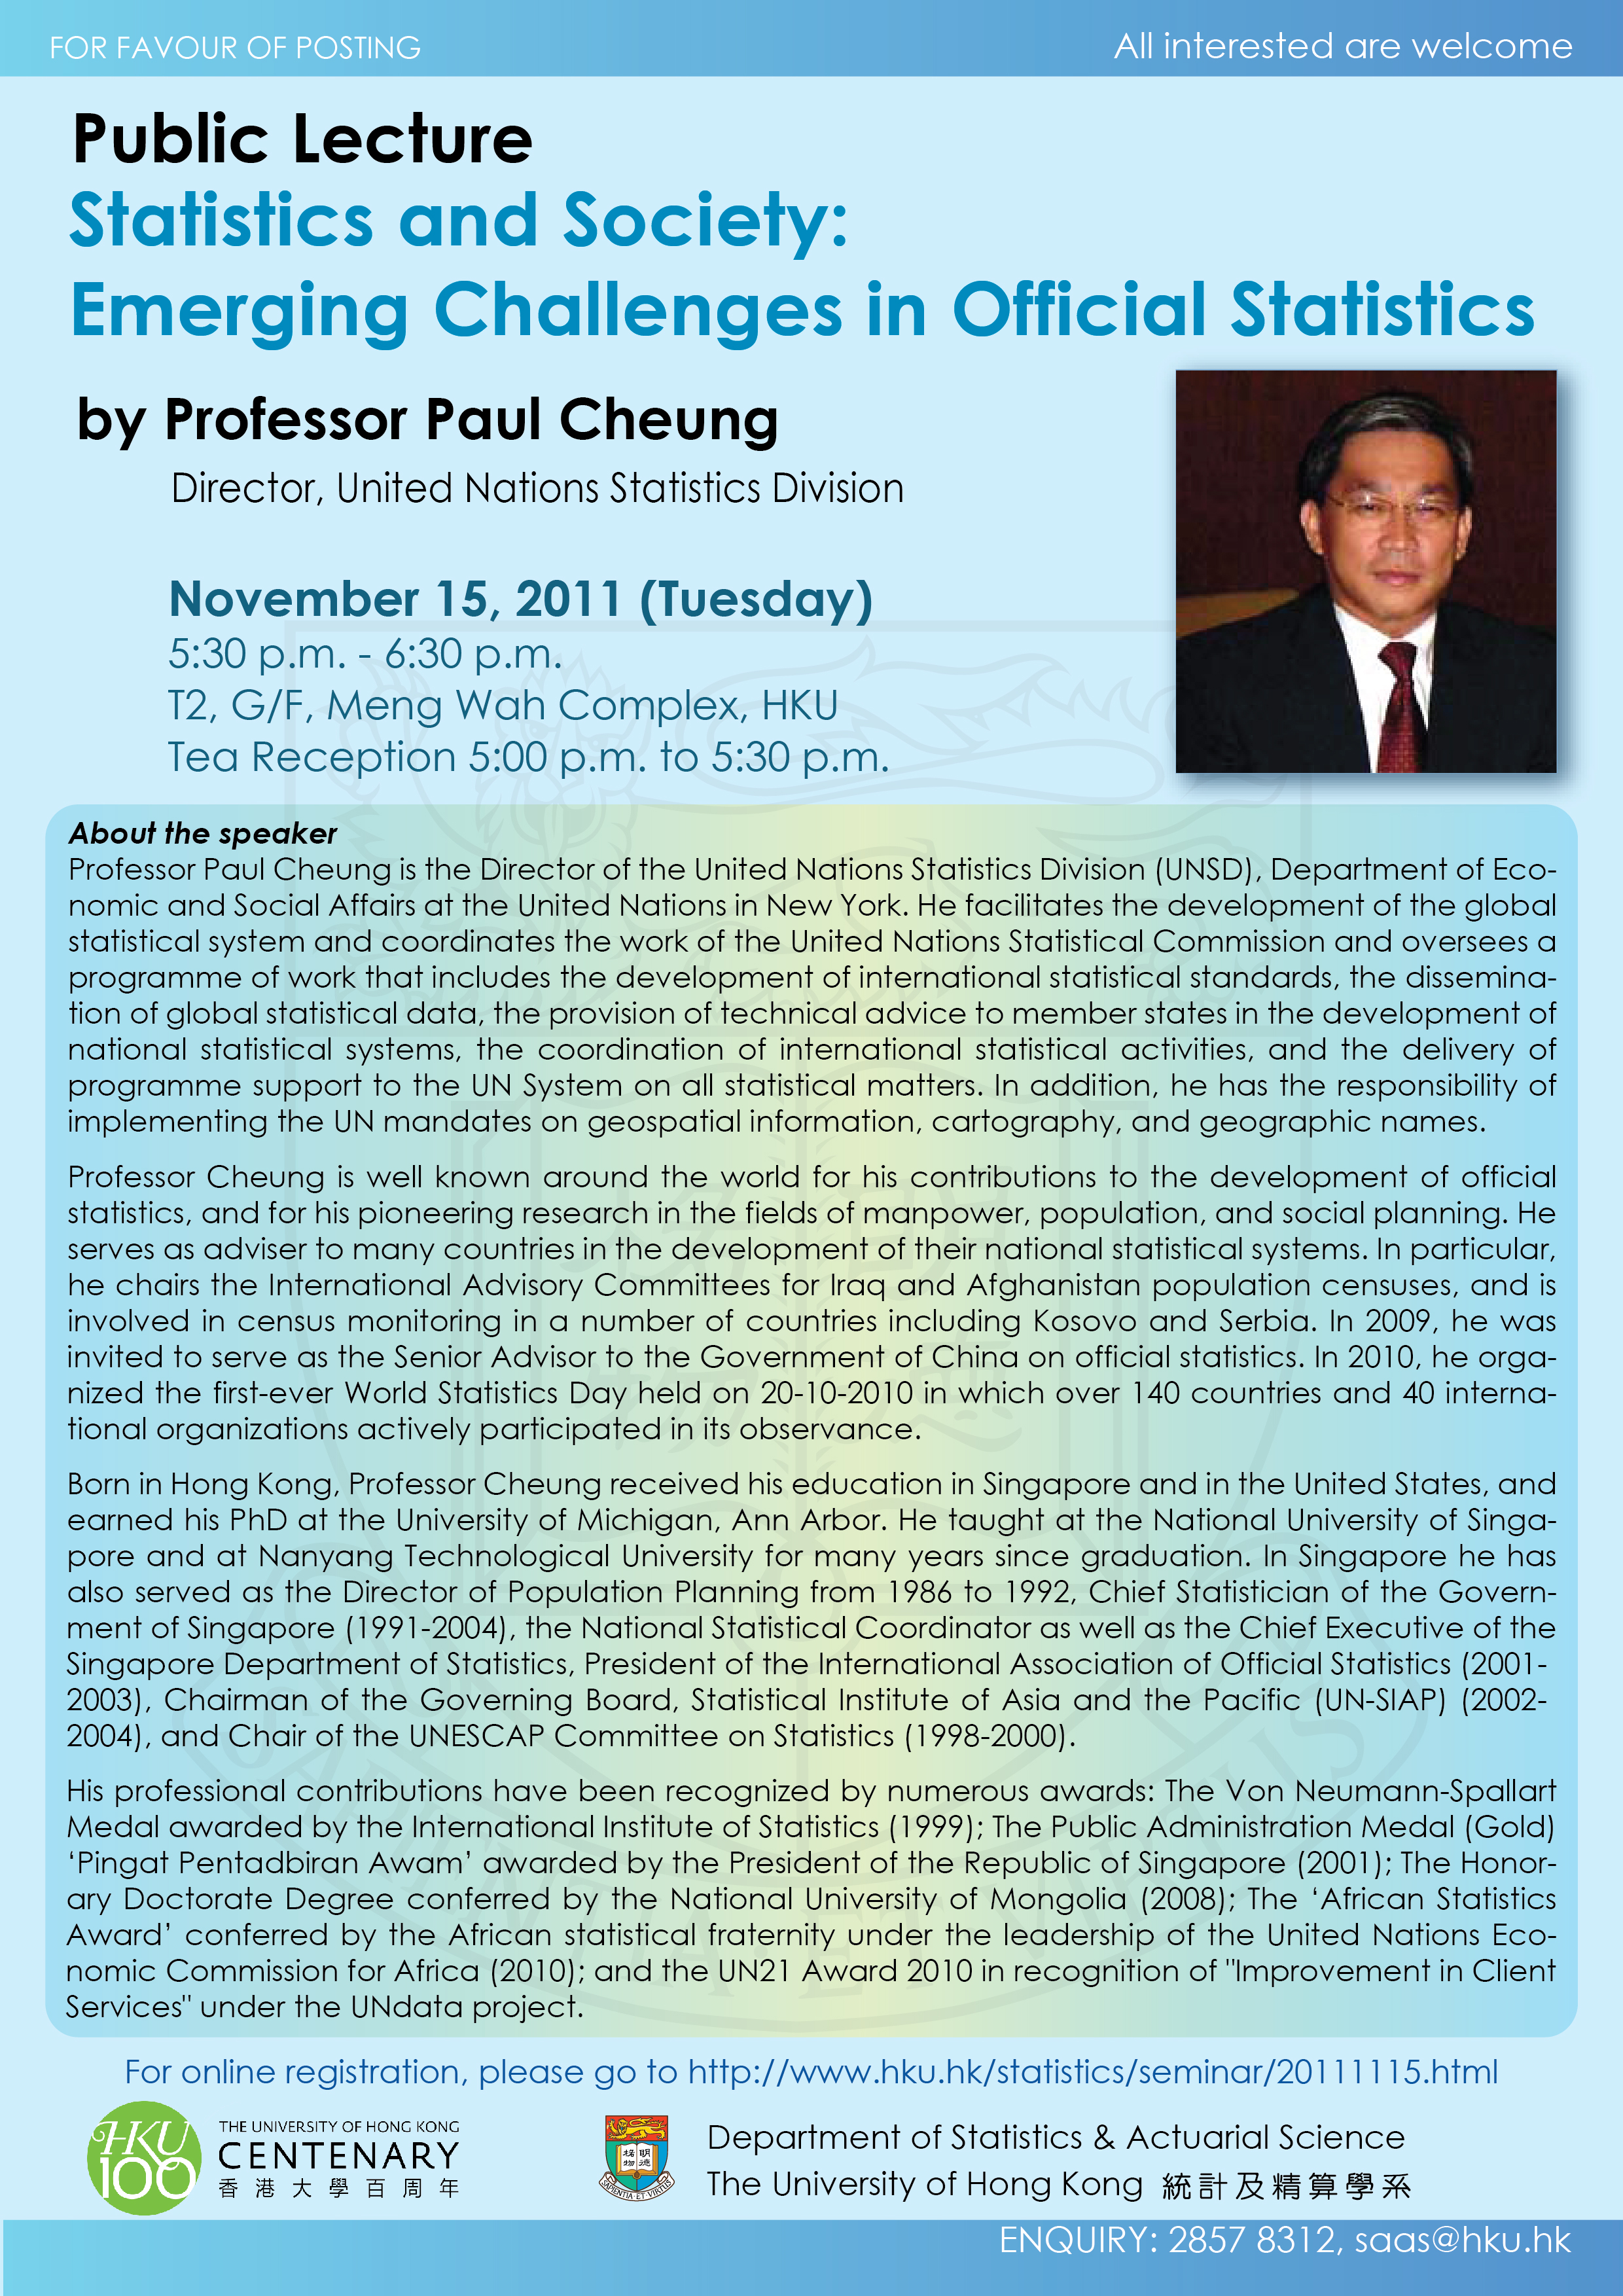 HKU100 Event: Public Lecture 'Statistics and Society: Emerging Challenges in Official Statistics' by Professor Paul Cheung on November 15, 2011